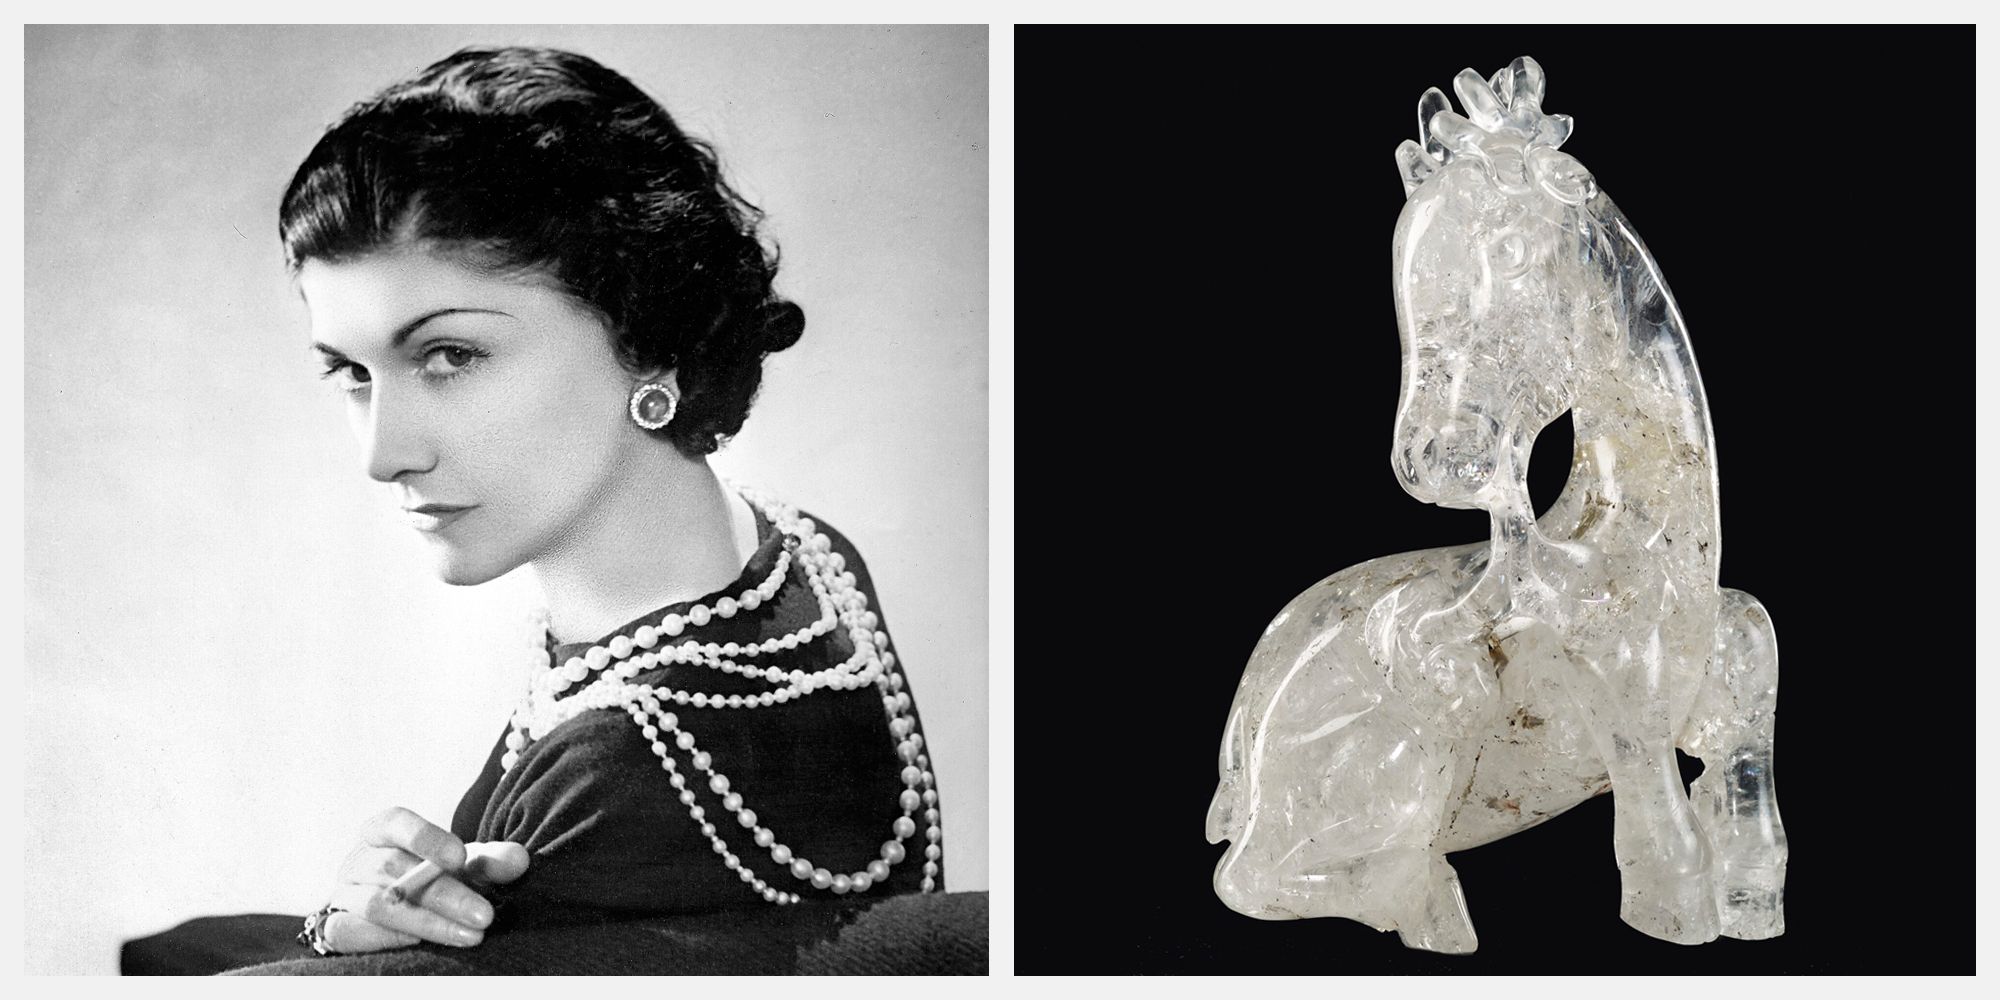 Coco Chanel's Beloved Glass Deer Statuette is Now For Sale